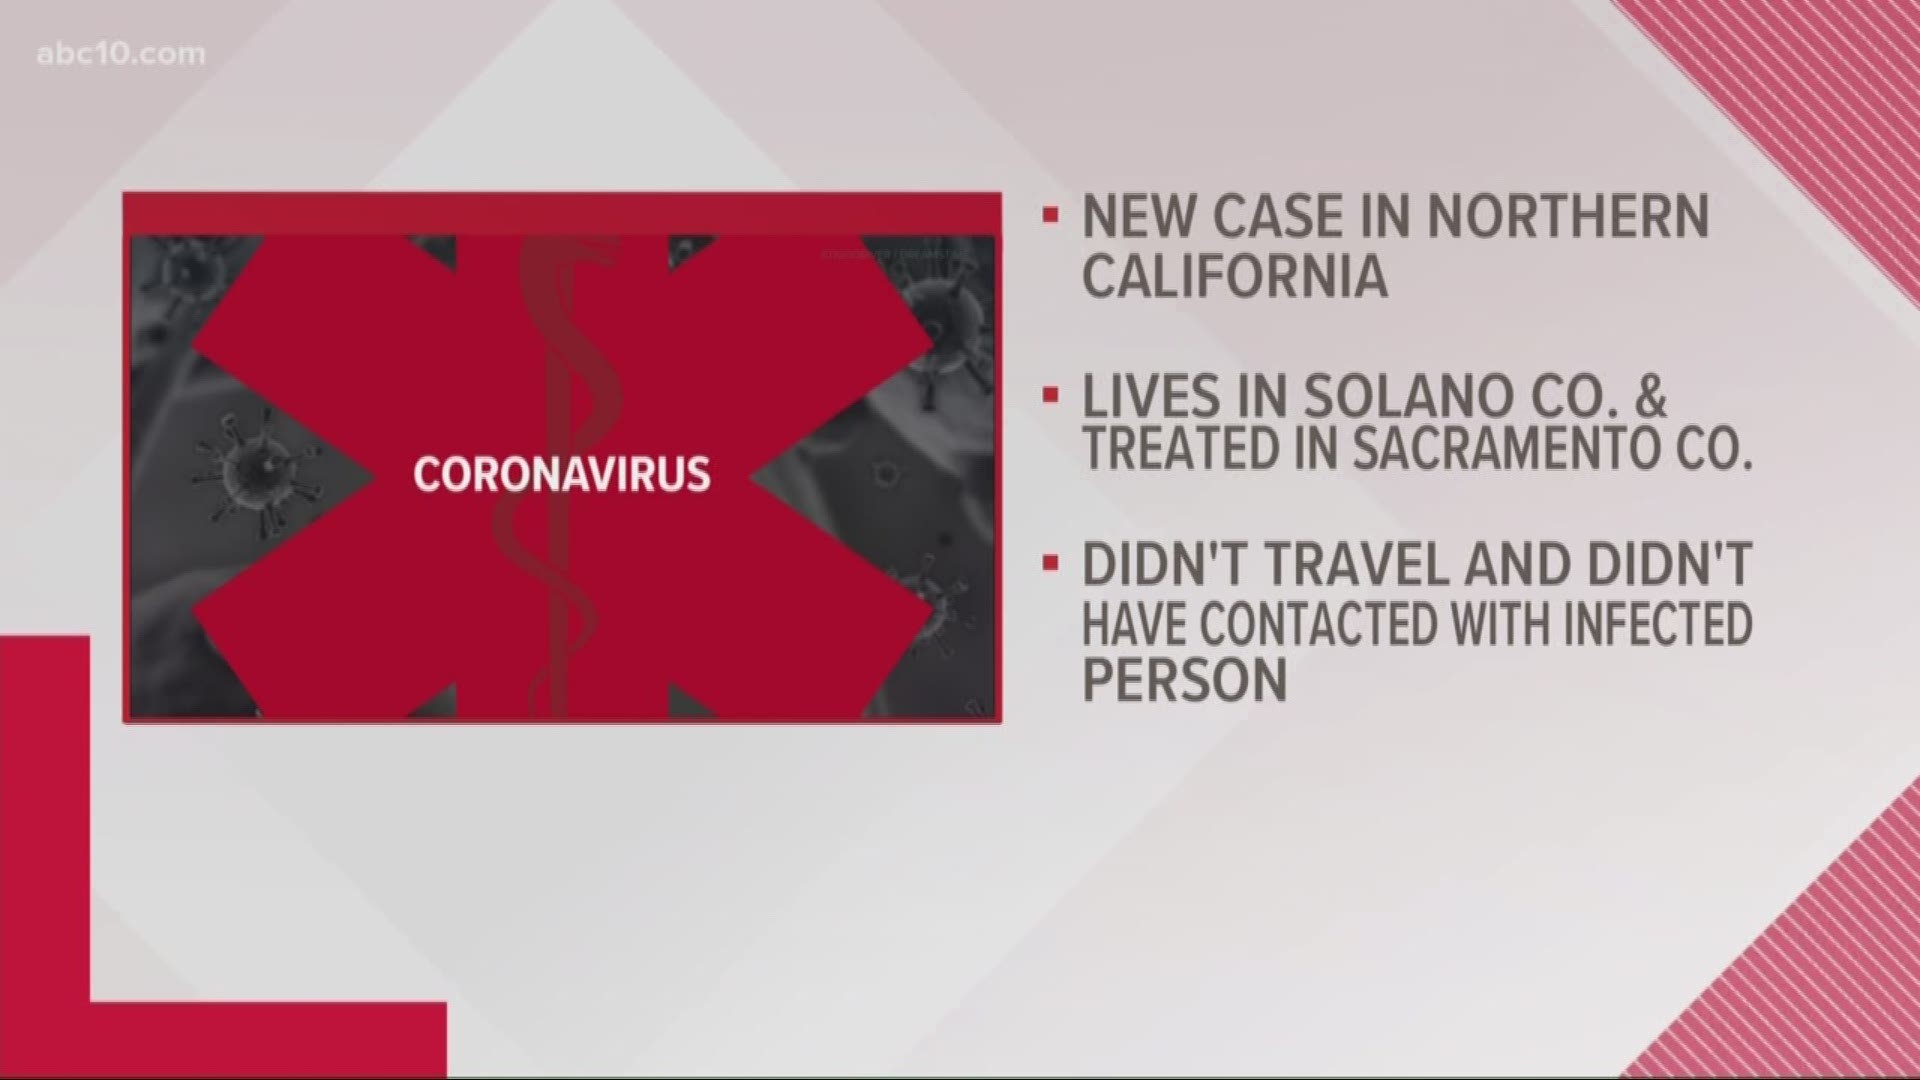 A Solano County resident is being treated in Sacramento for the coronavirus, the first confirmed person-to-person case in California, health officials confirmed.